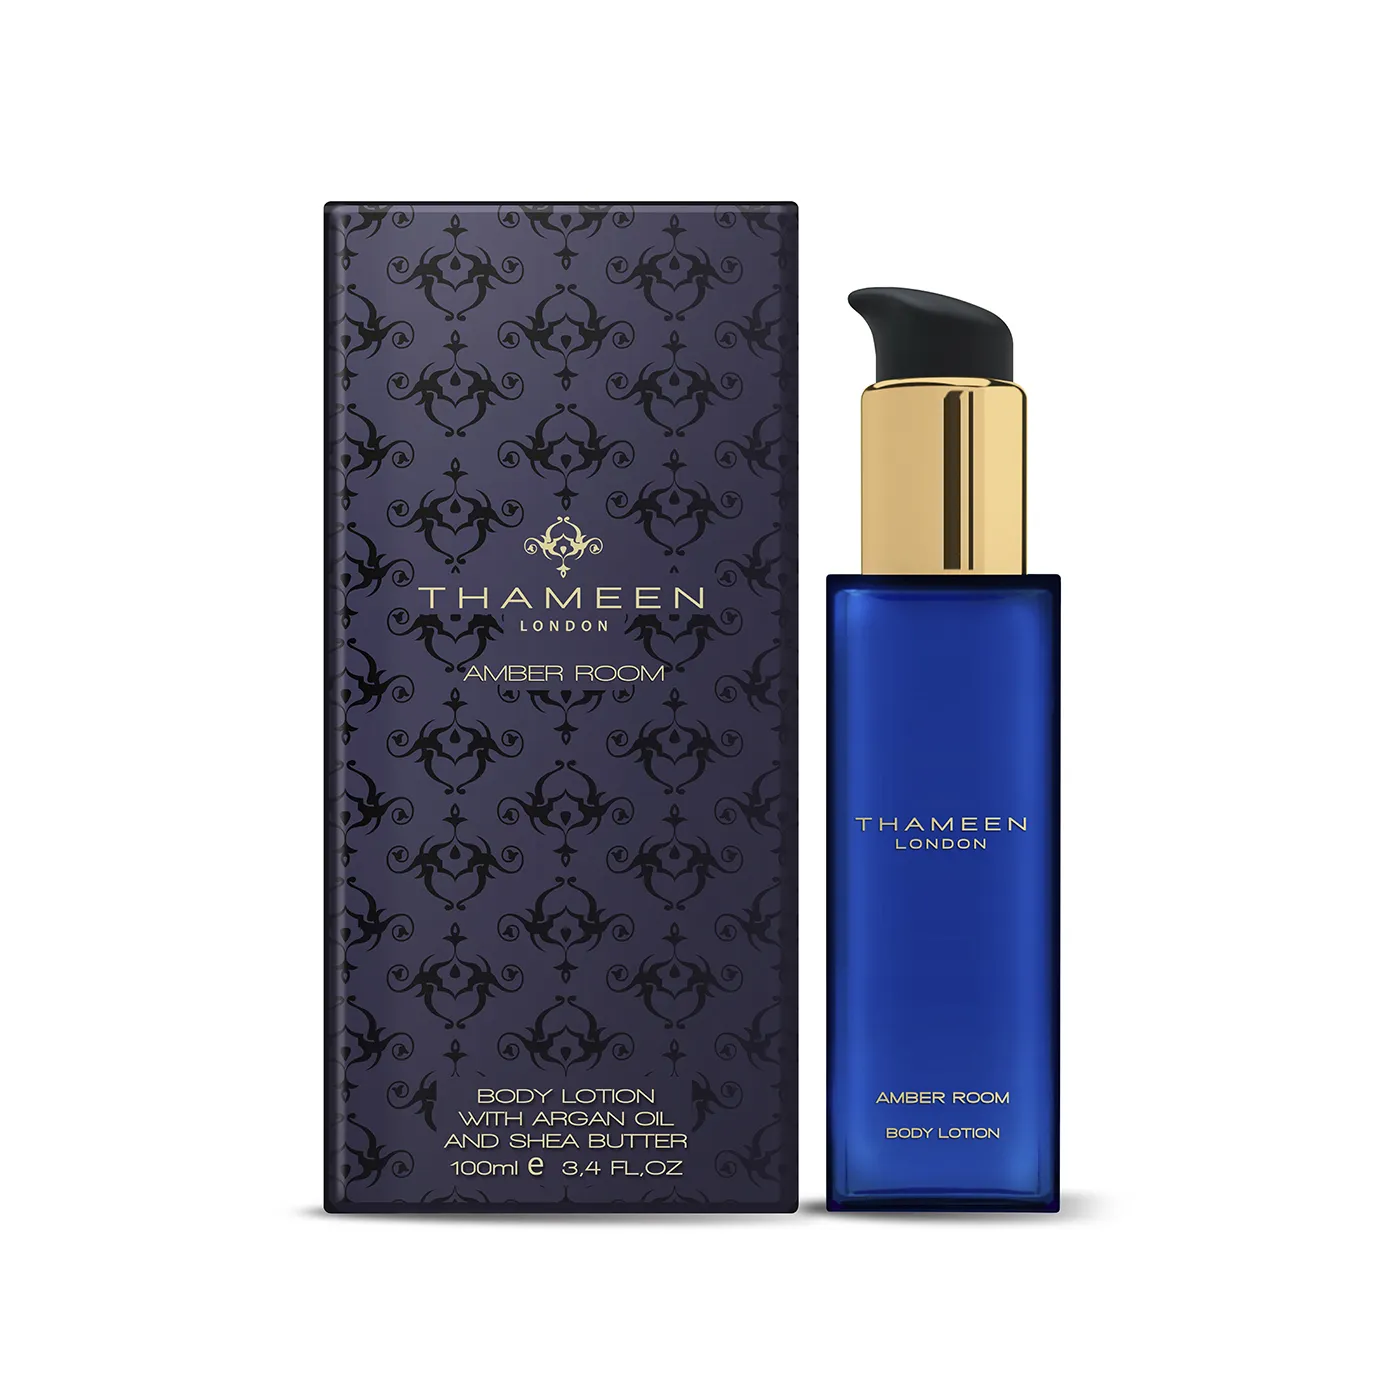 Thameen London - Amber Room - Body Lotion